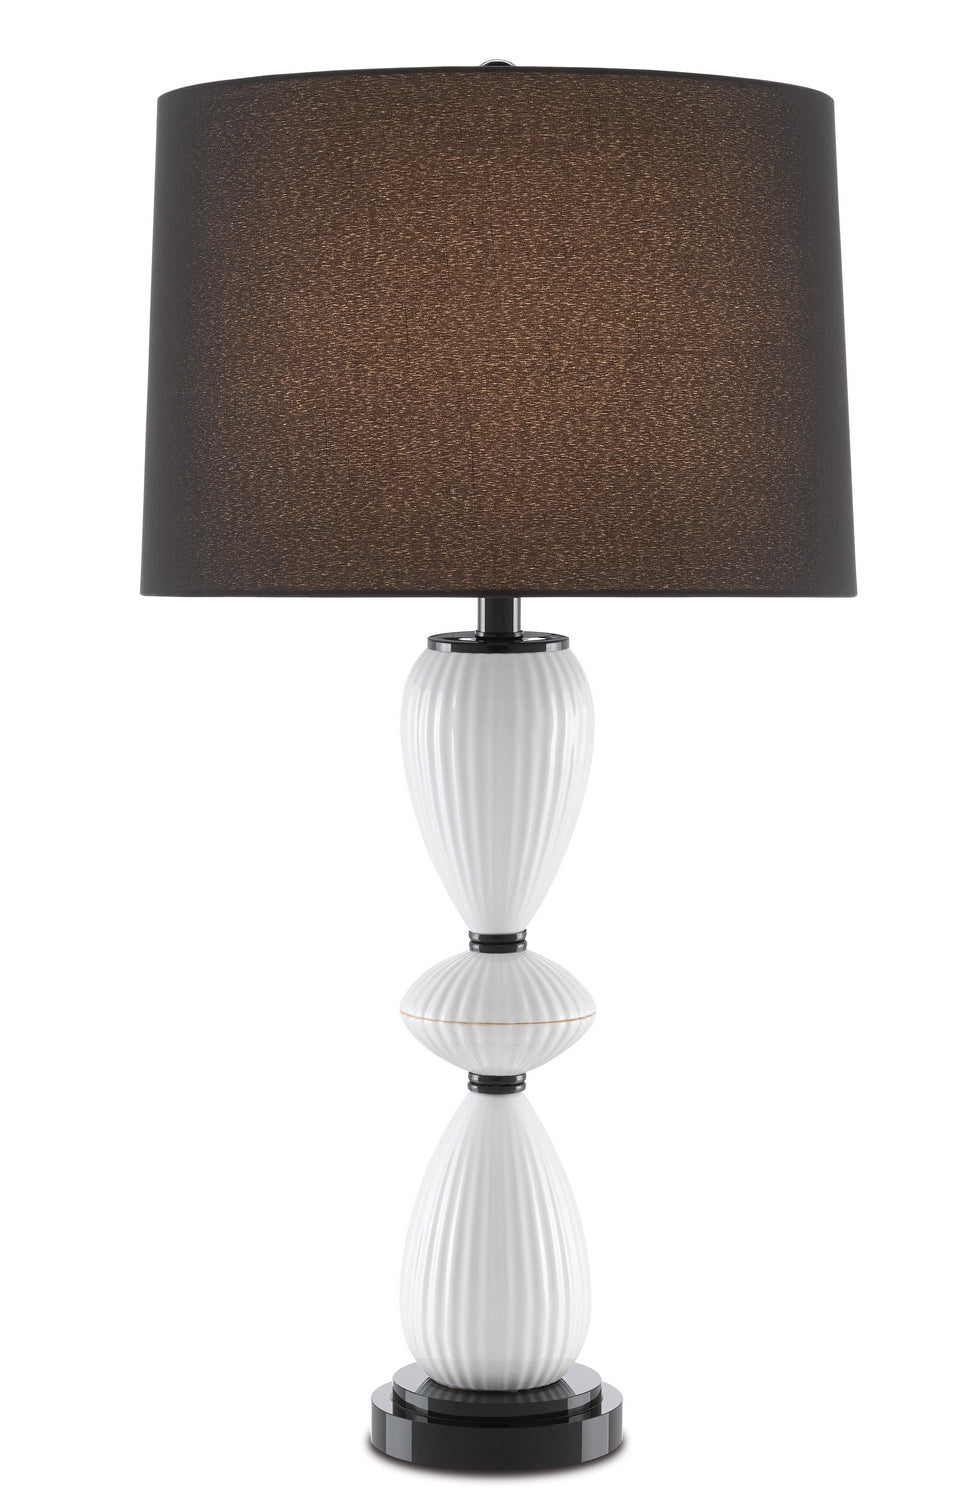 Currey and Company - 6000-0660 - One Light Table Lamp - Cordelia